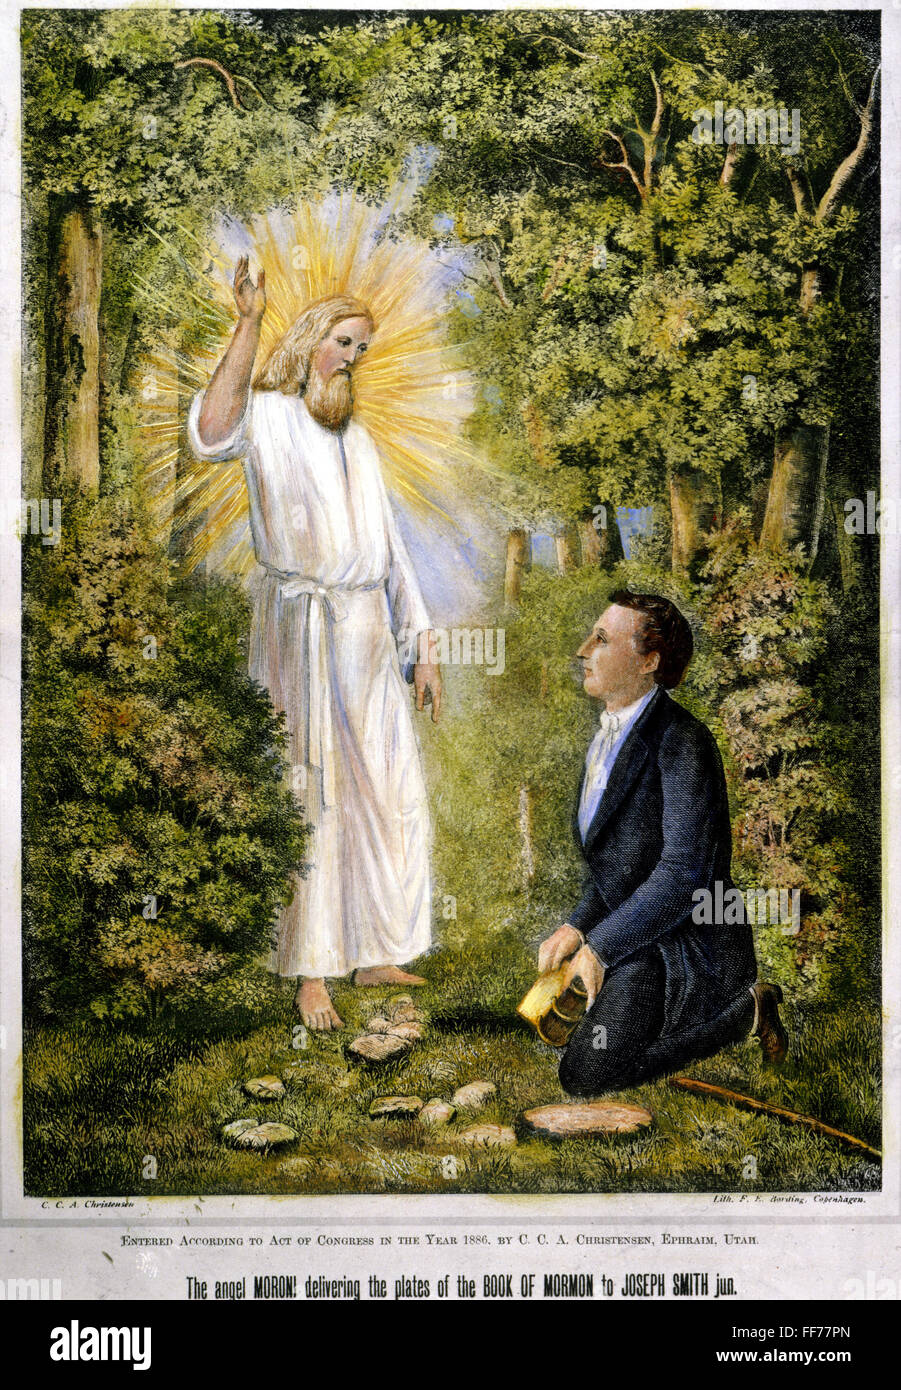 MORONI AND JOSEPH SMITH. /nThe angel Moroni delivering the plates of the Book of Mormon to Joseph Smith in western New York, 1827. Lithograph, 1886. Stock Photo